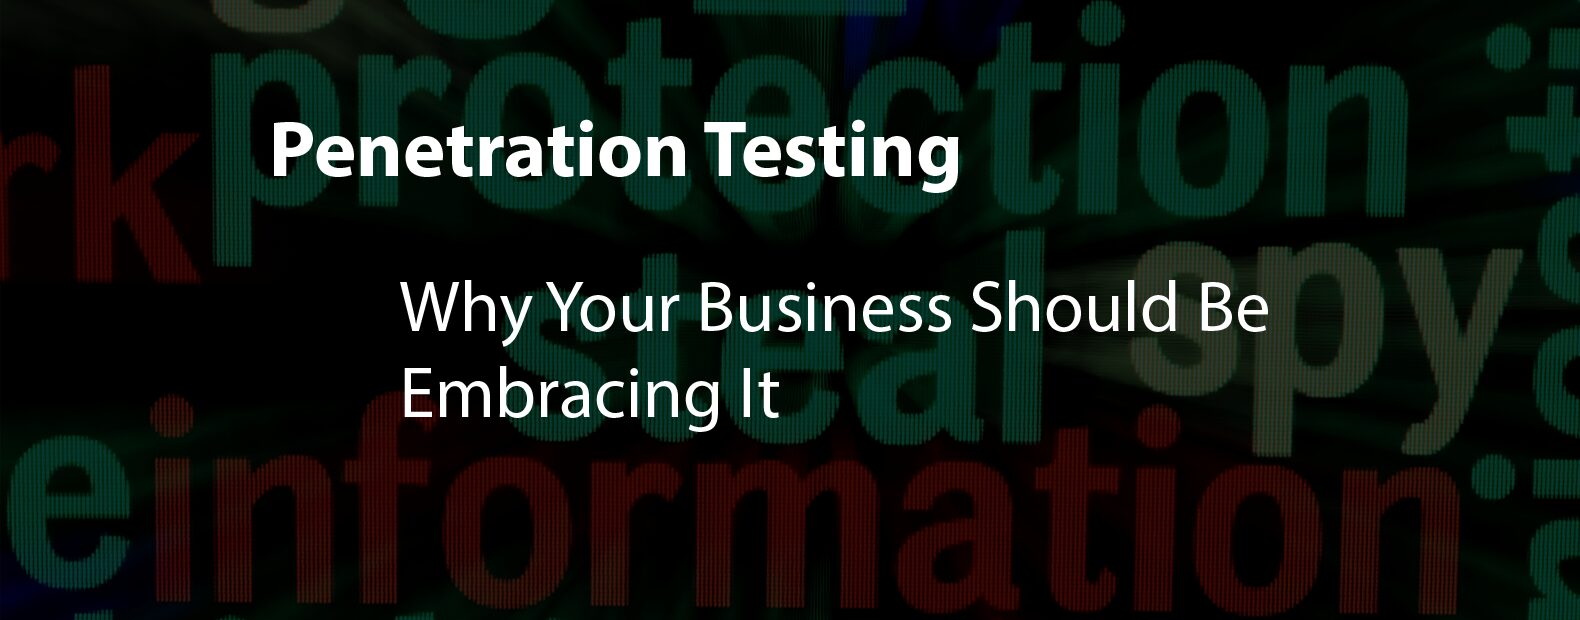 Penetration Testing is a Critical Tool For Your Business